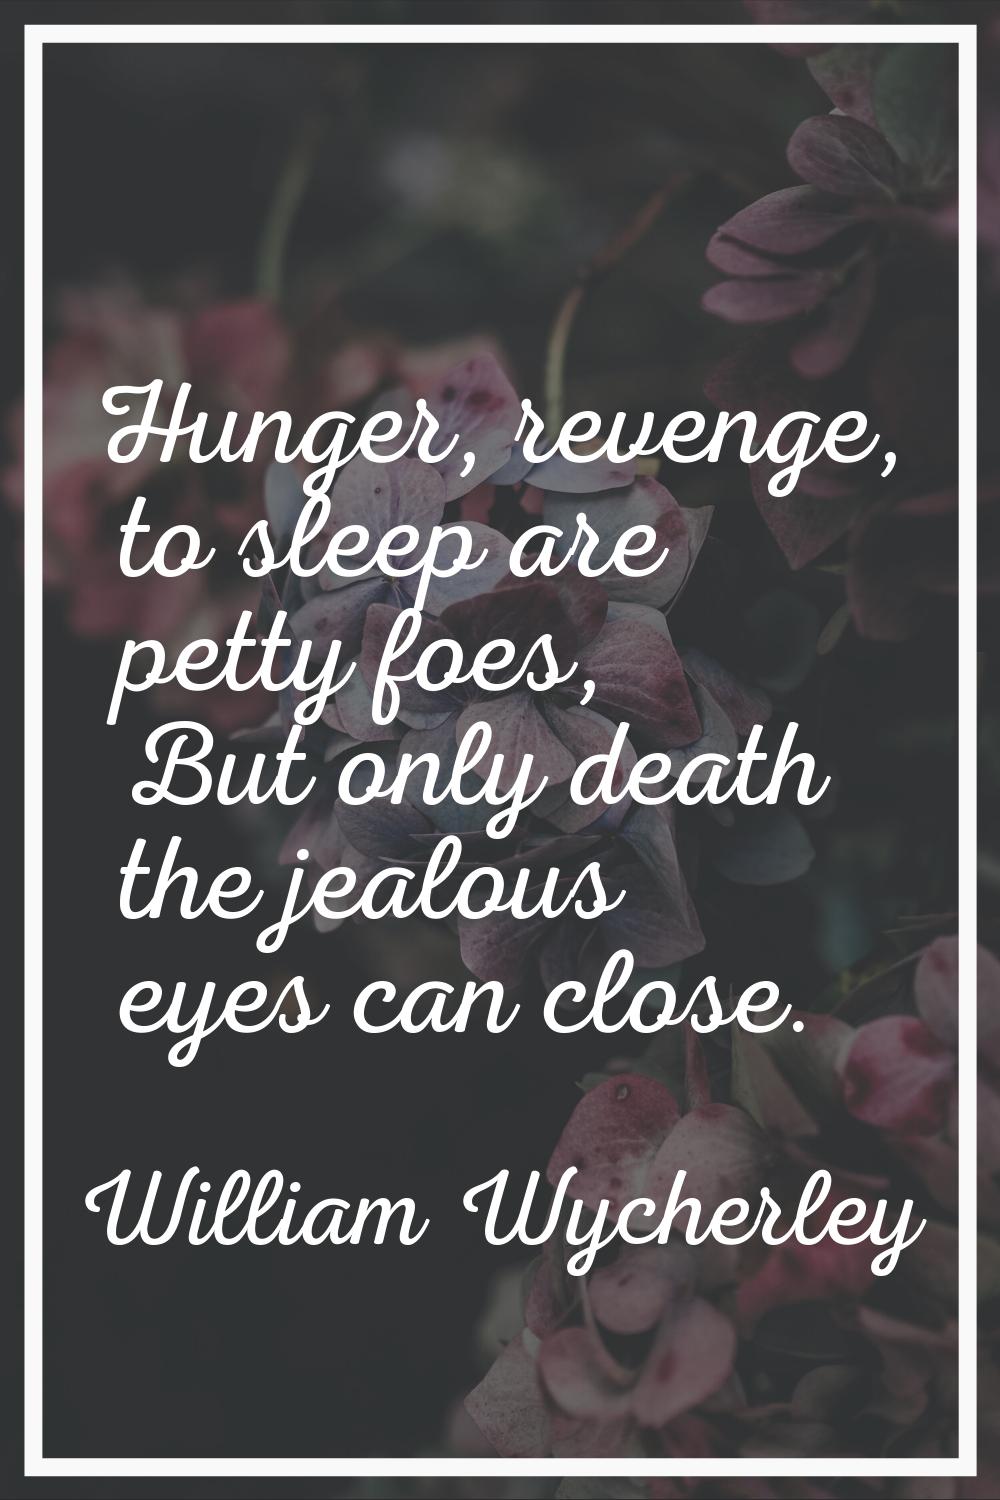 Hunger, revenge, to sleep are petty foes, But only death the jealous eyes can close.